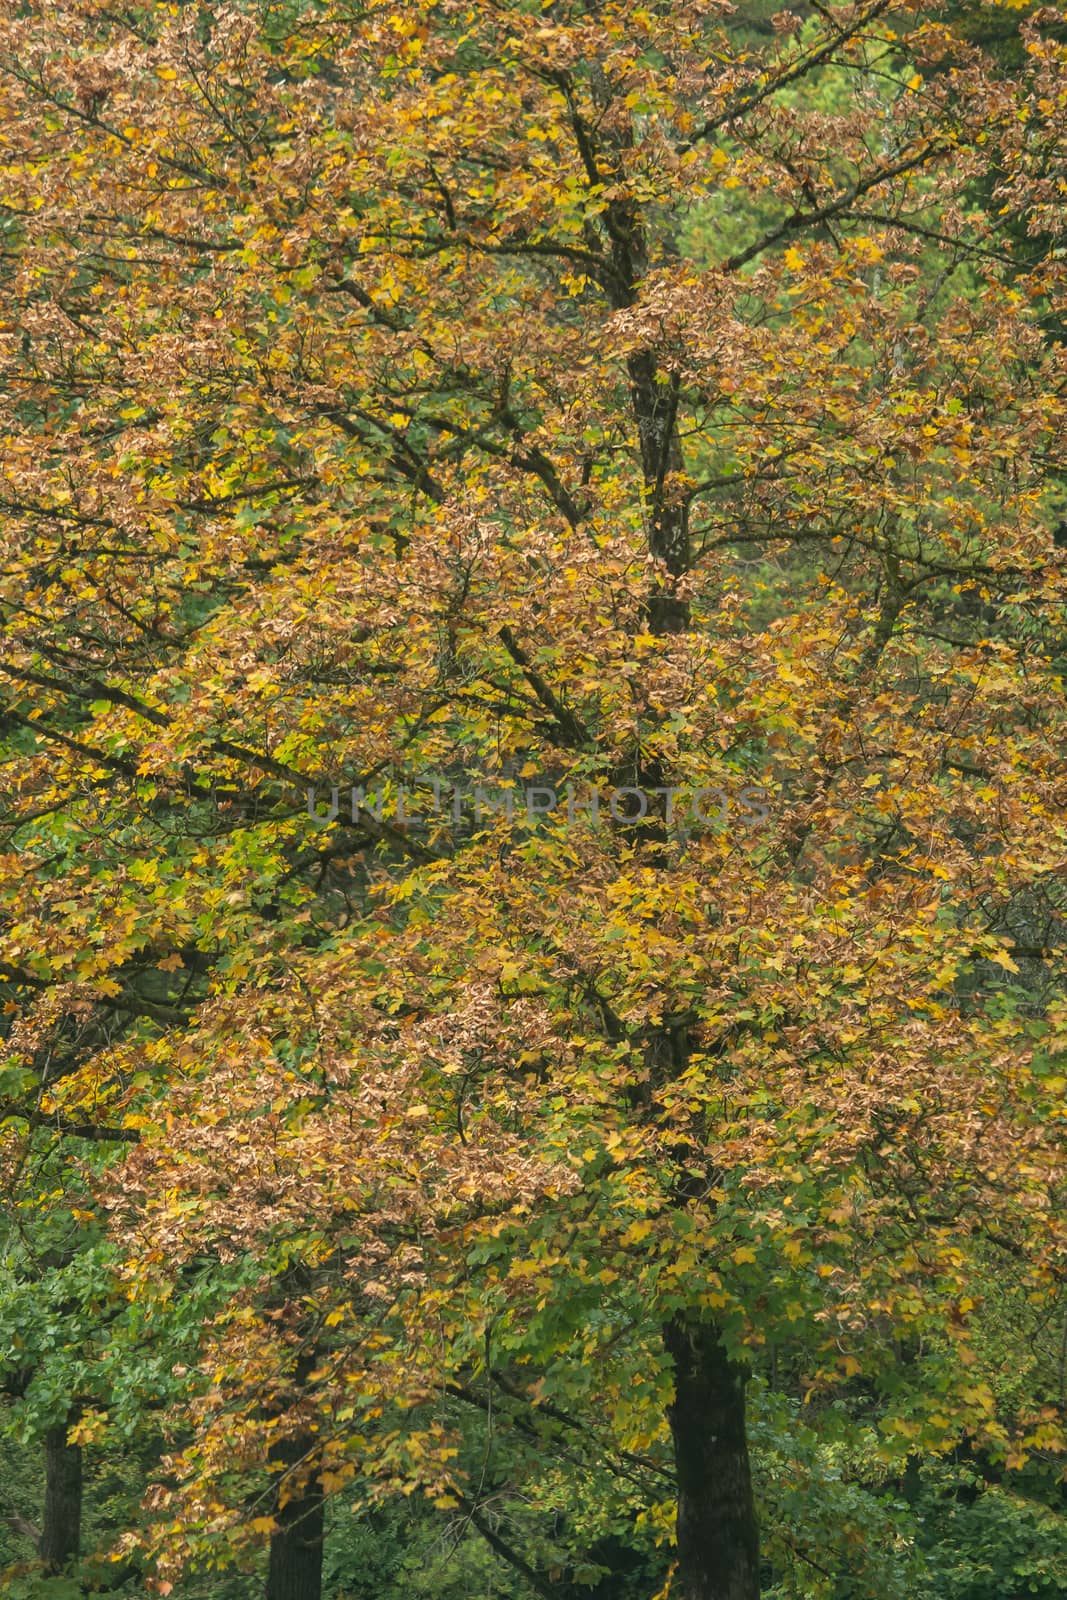 Trees and shrubs in beautiful autumnal colors